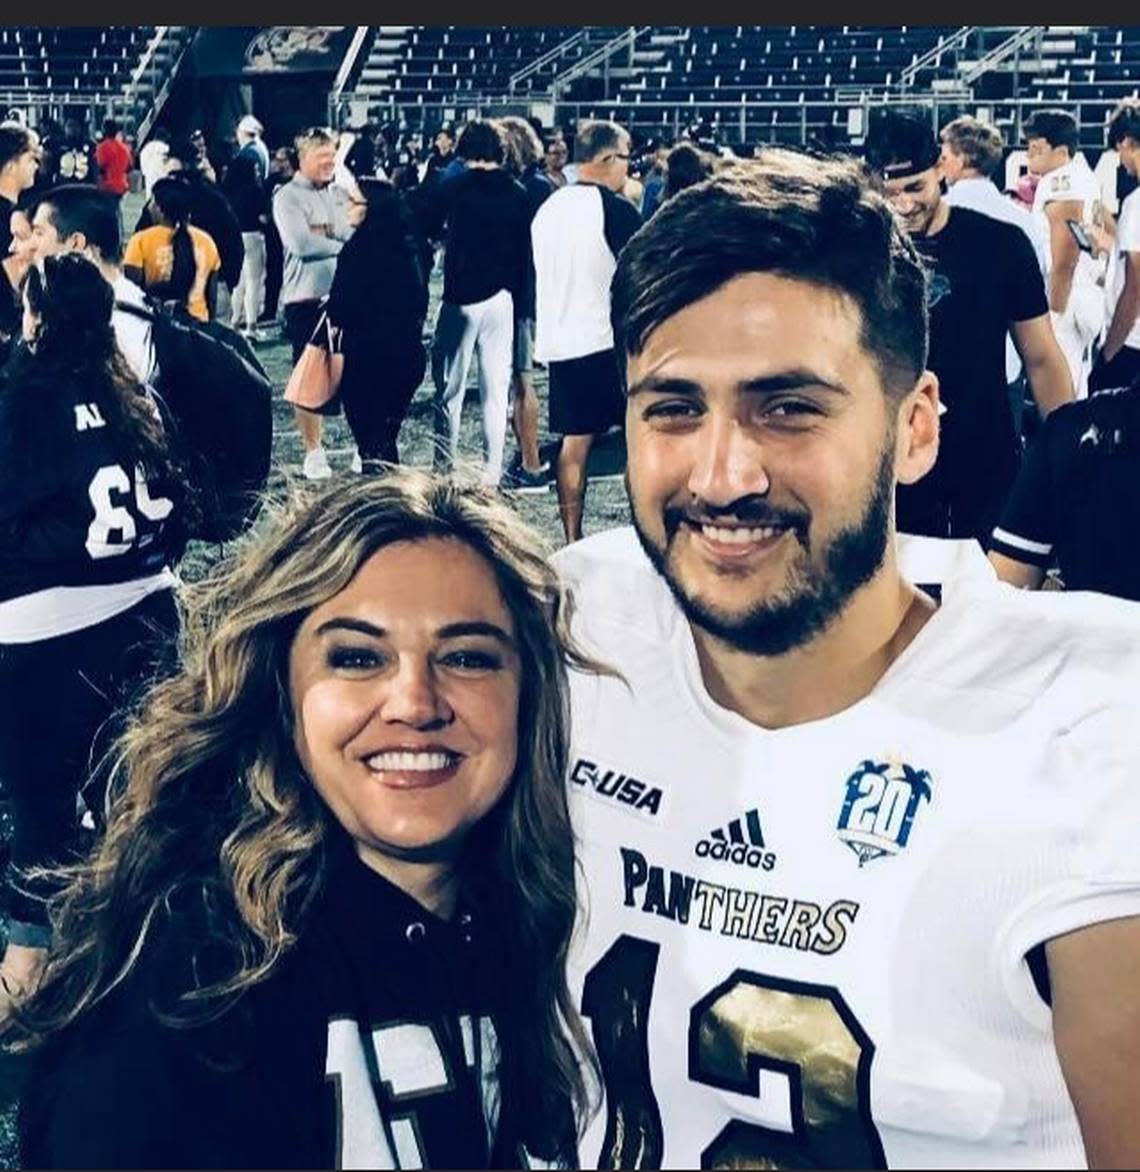 FIU quarterback Gunnar Holmberg (right) with his mother, Jennifer. Holmberg is the frontrunner to land FIU’s starting quarterback spot to open the 2022 season.